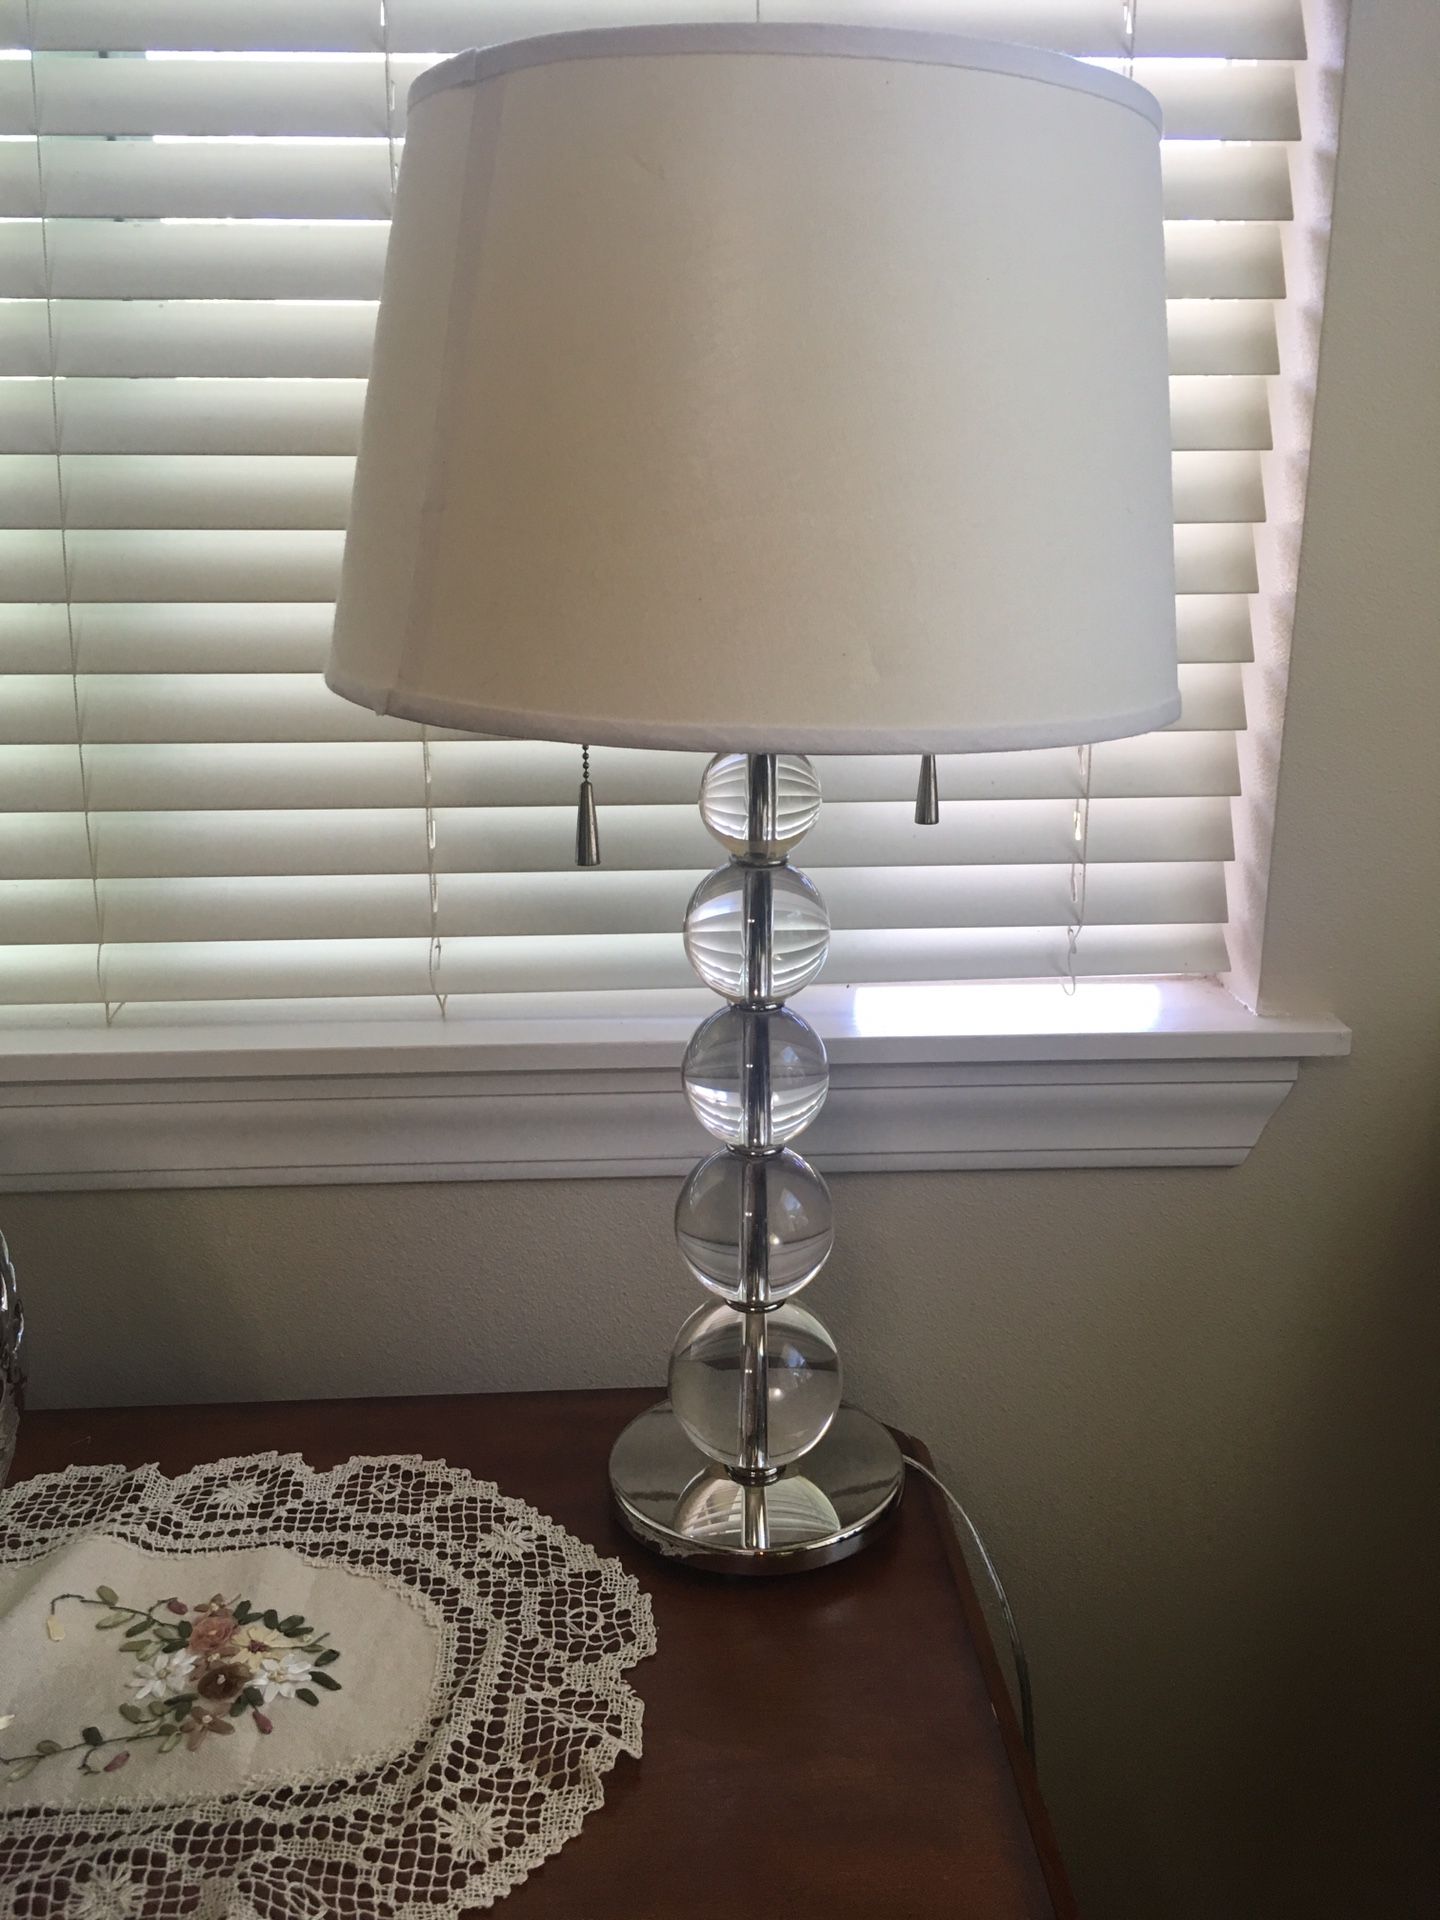 Glass lamp with dual lights